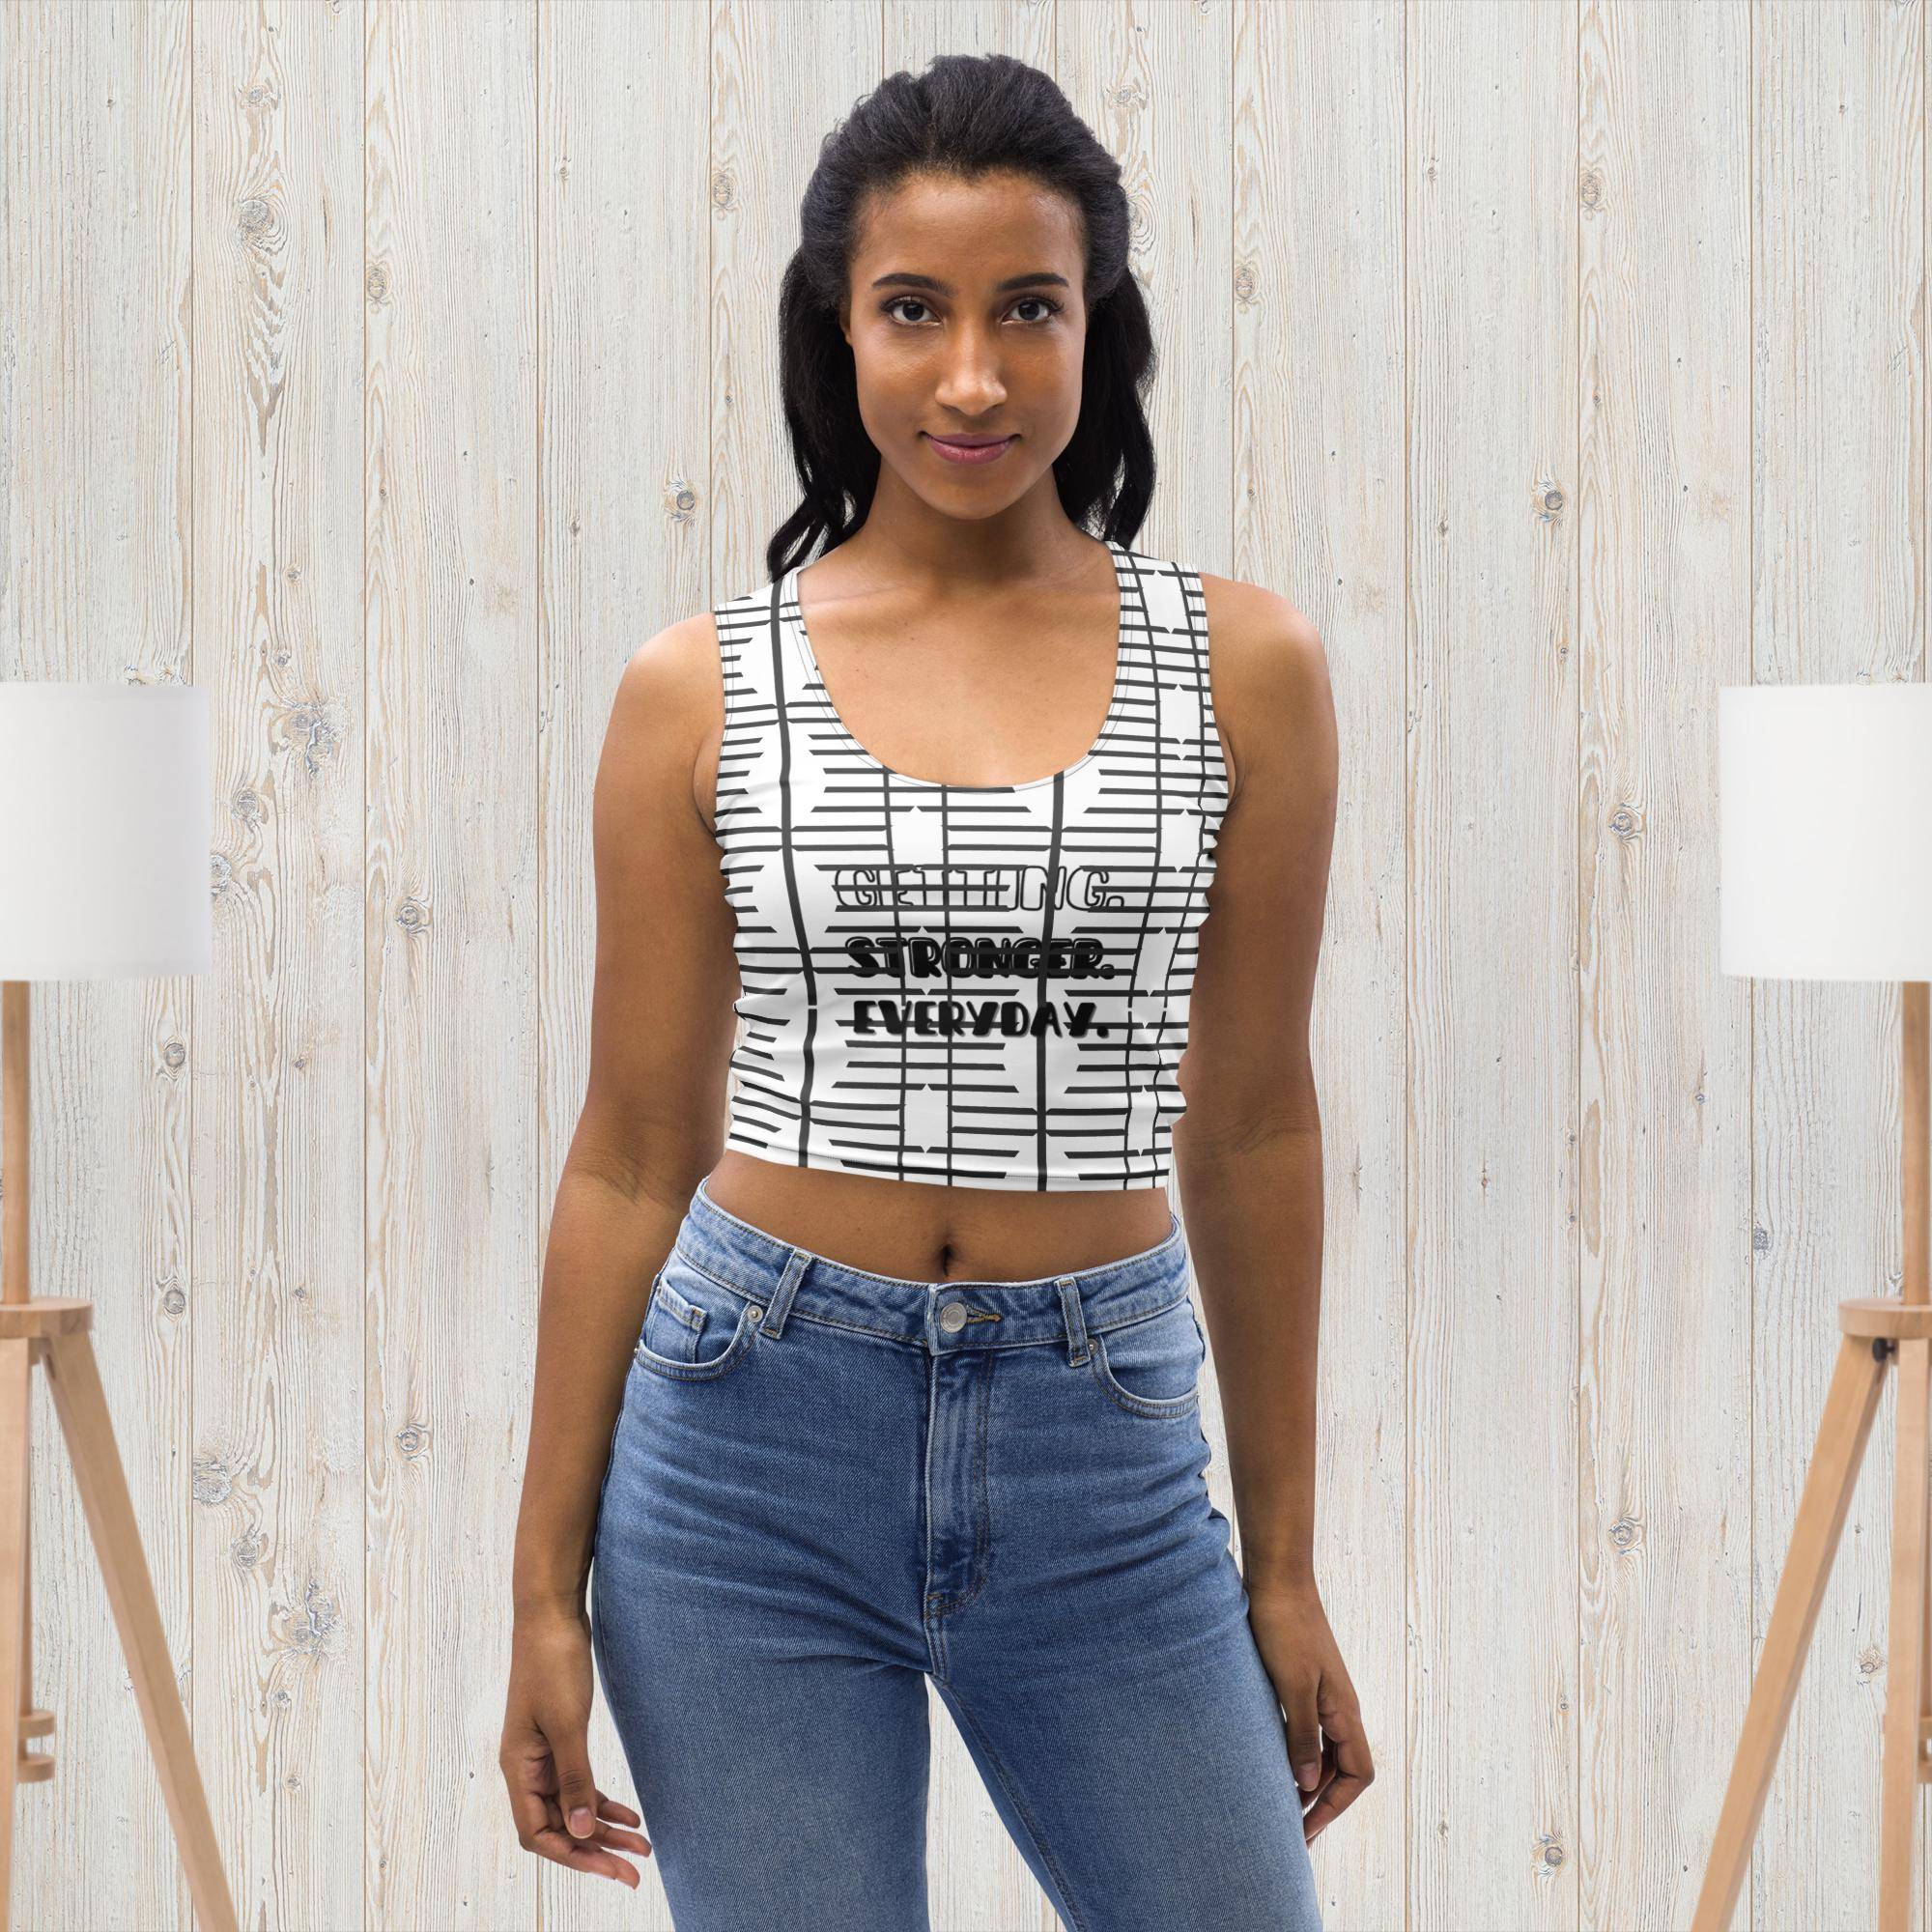 Black Crop Top - Revive Wear     Black Crop Top. Get this stylish black crop top, one of the most popular women's workout tops. Made of breathable, stretchy fabric for maximum comfort. Shop Tops.  